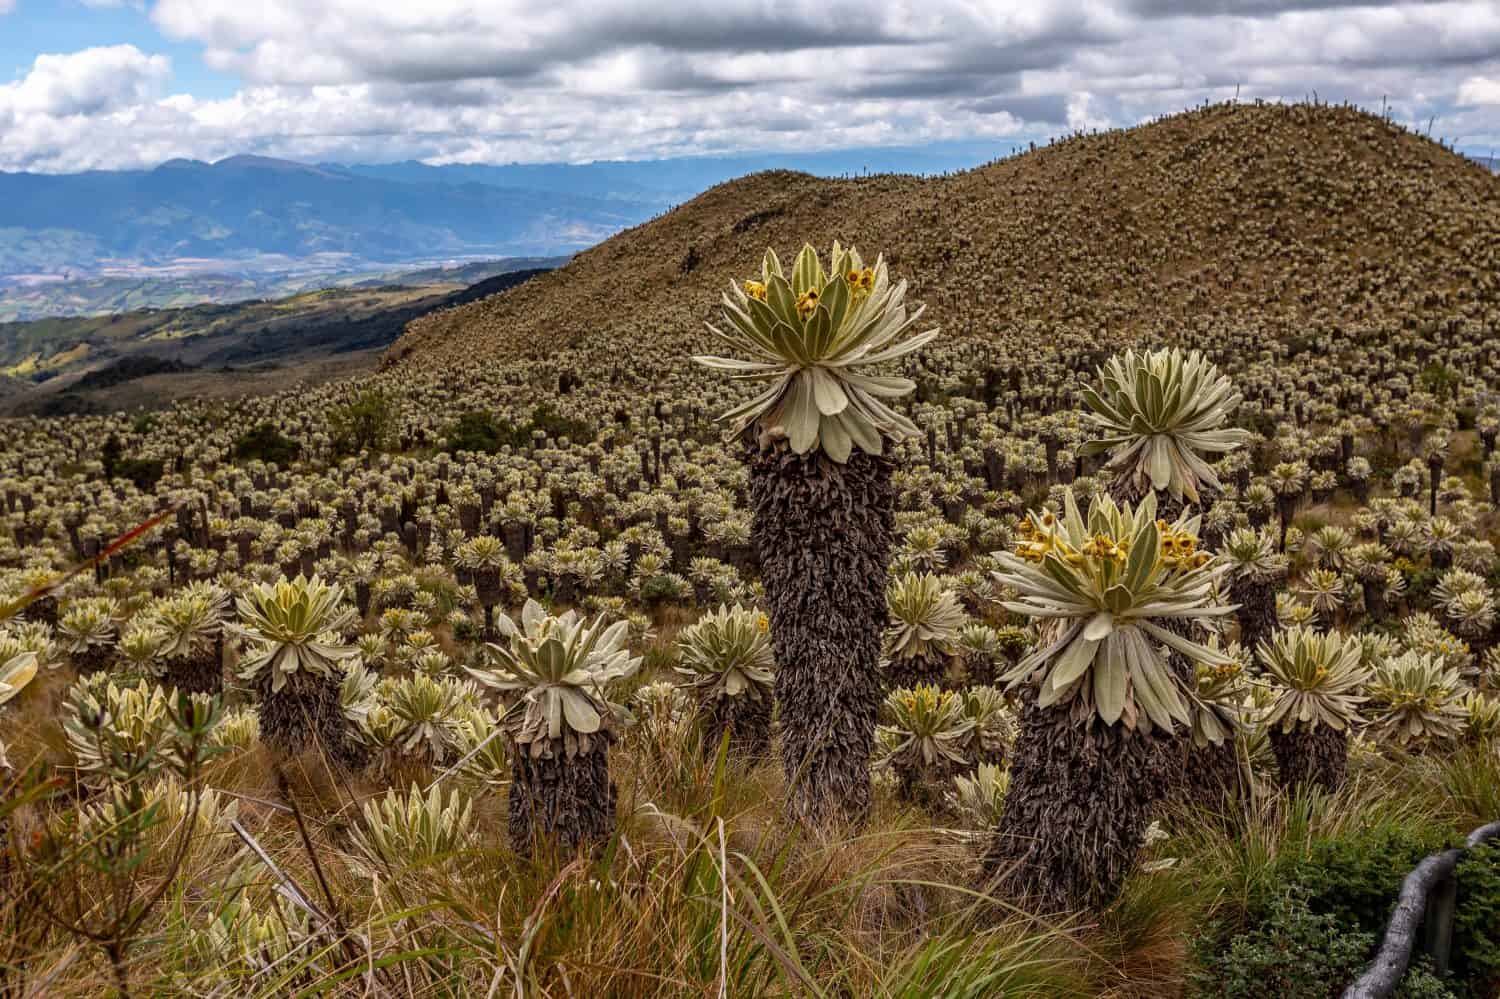 The moors of El Ángel, at the foot of the Chiles volcano, are covered by the famous frailejones, beautiful plants with leaves like rabbit ears.